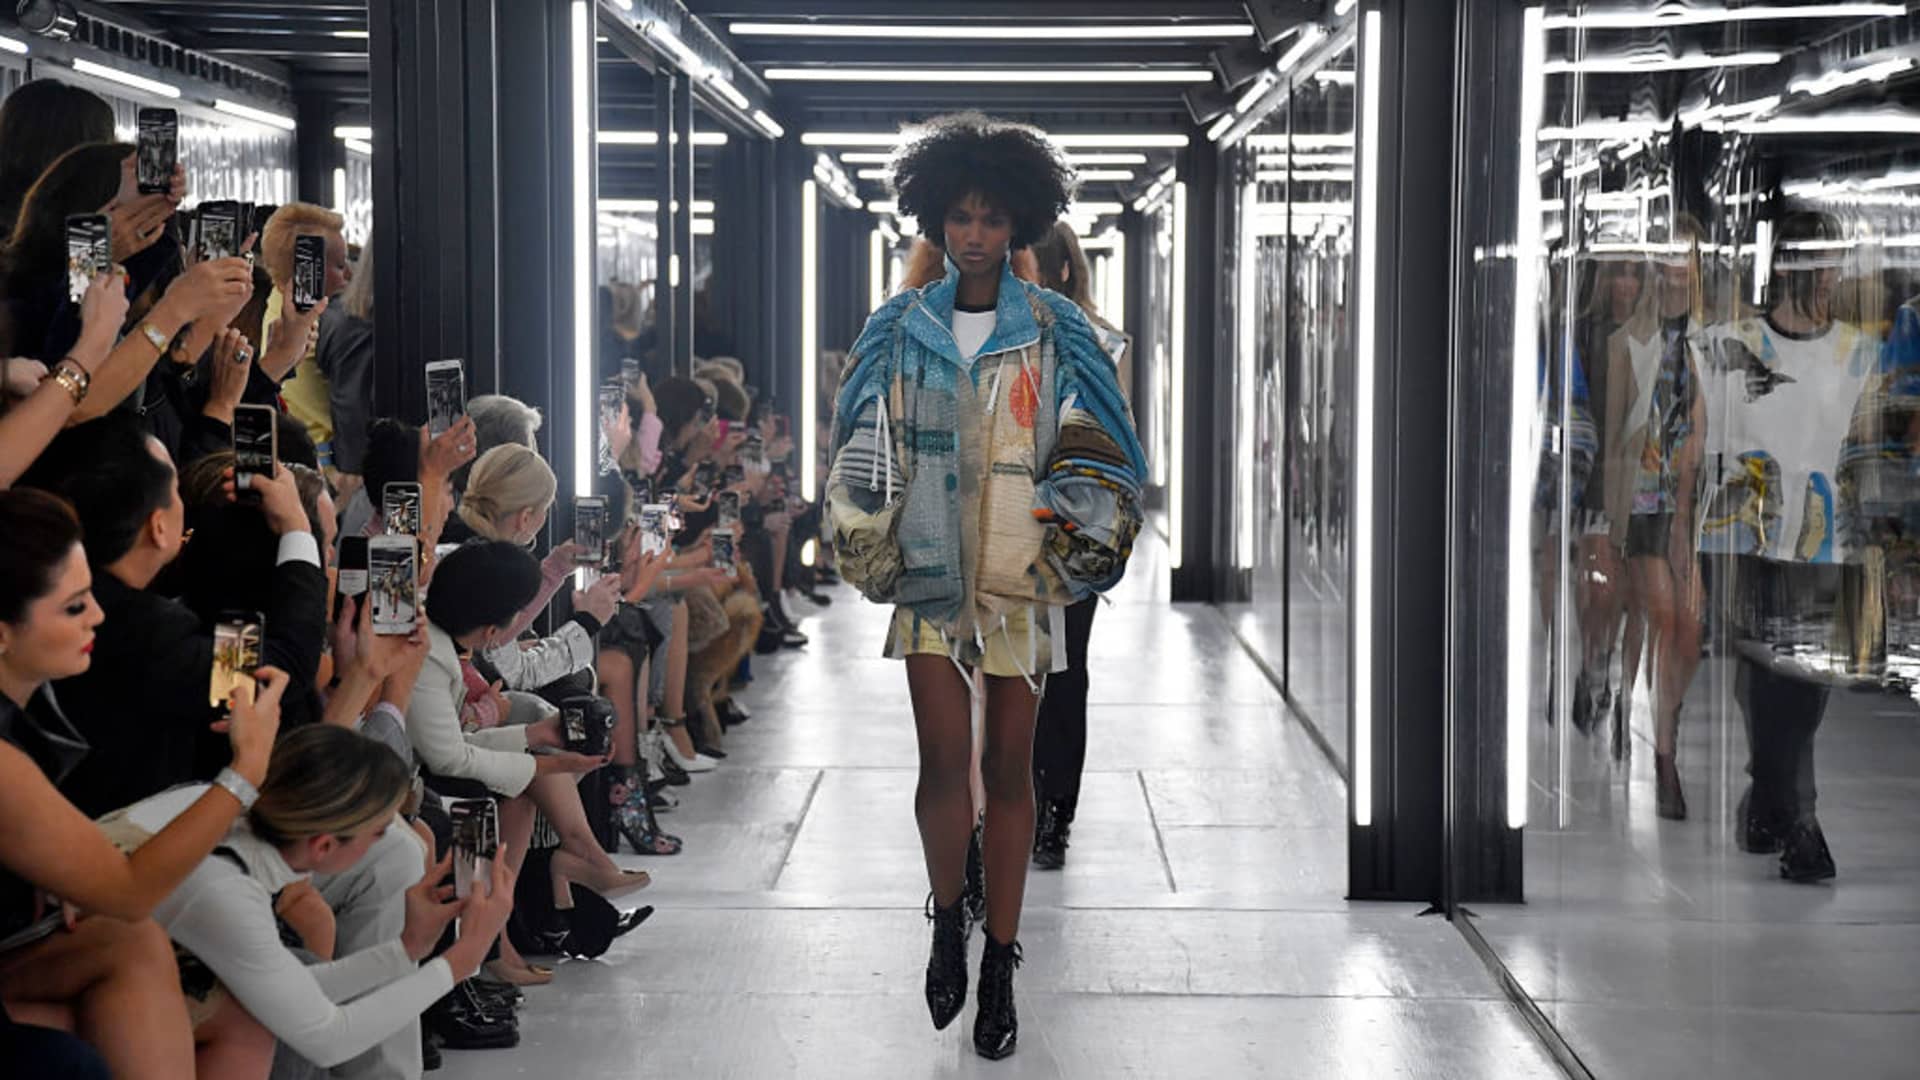 Commetric - Luxury fashion brands' engagement on social media is